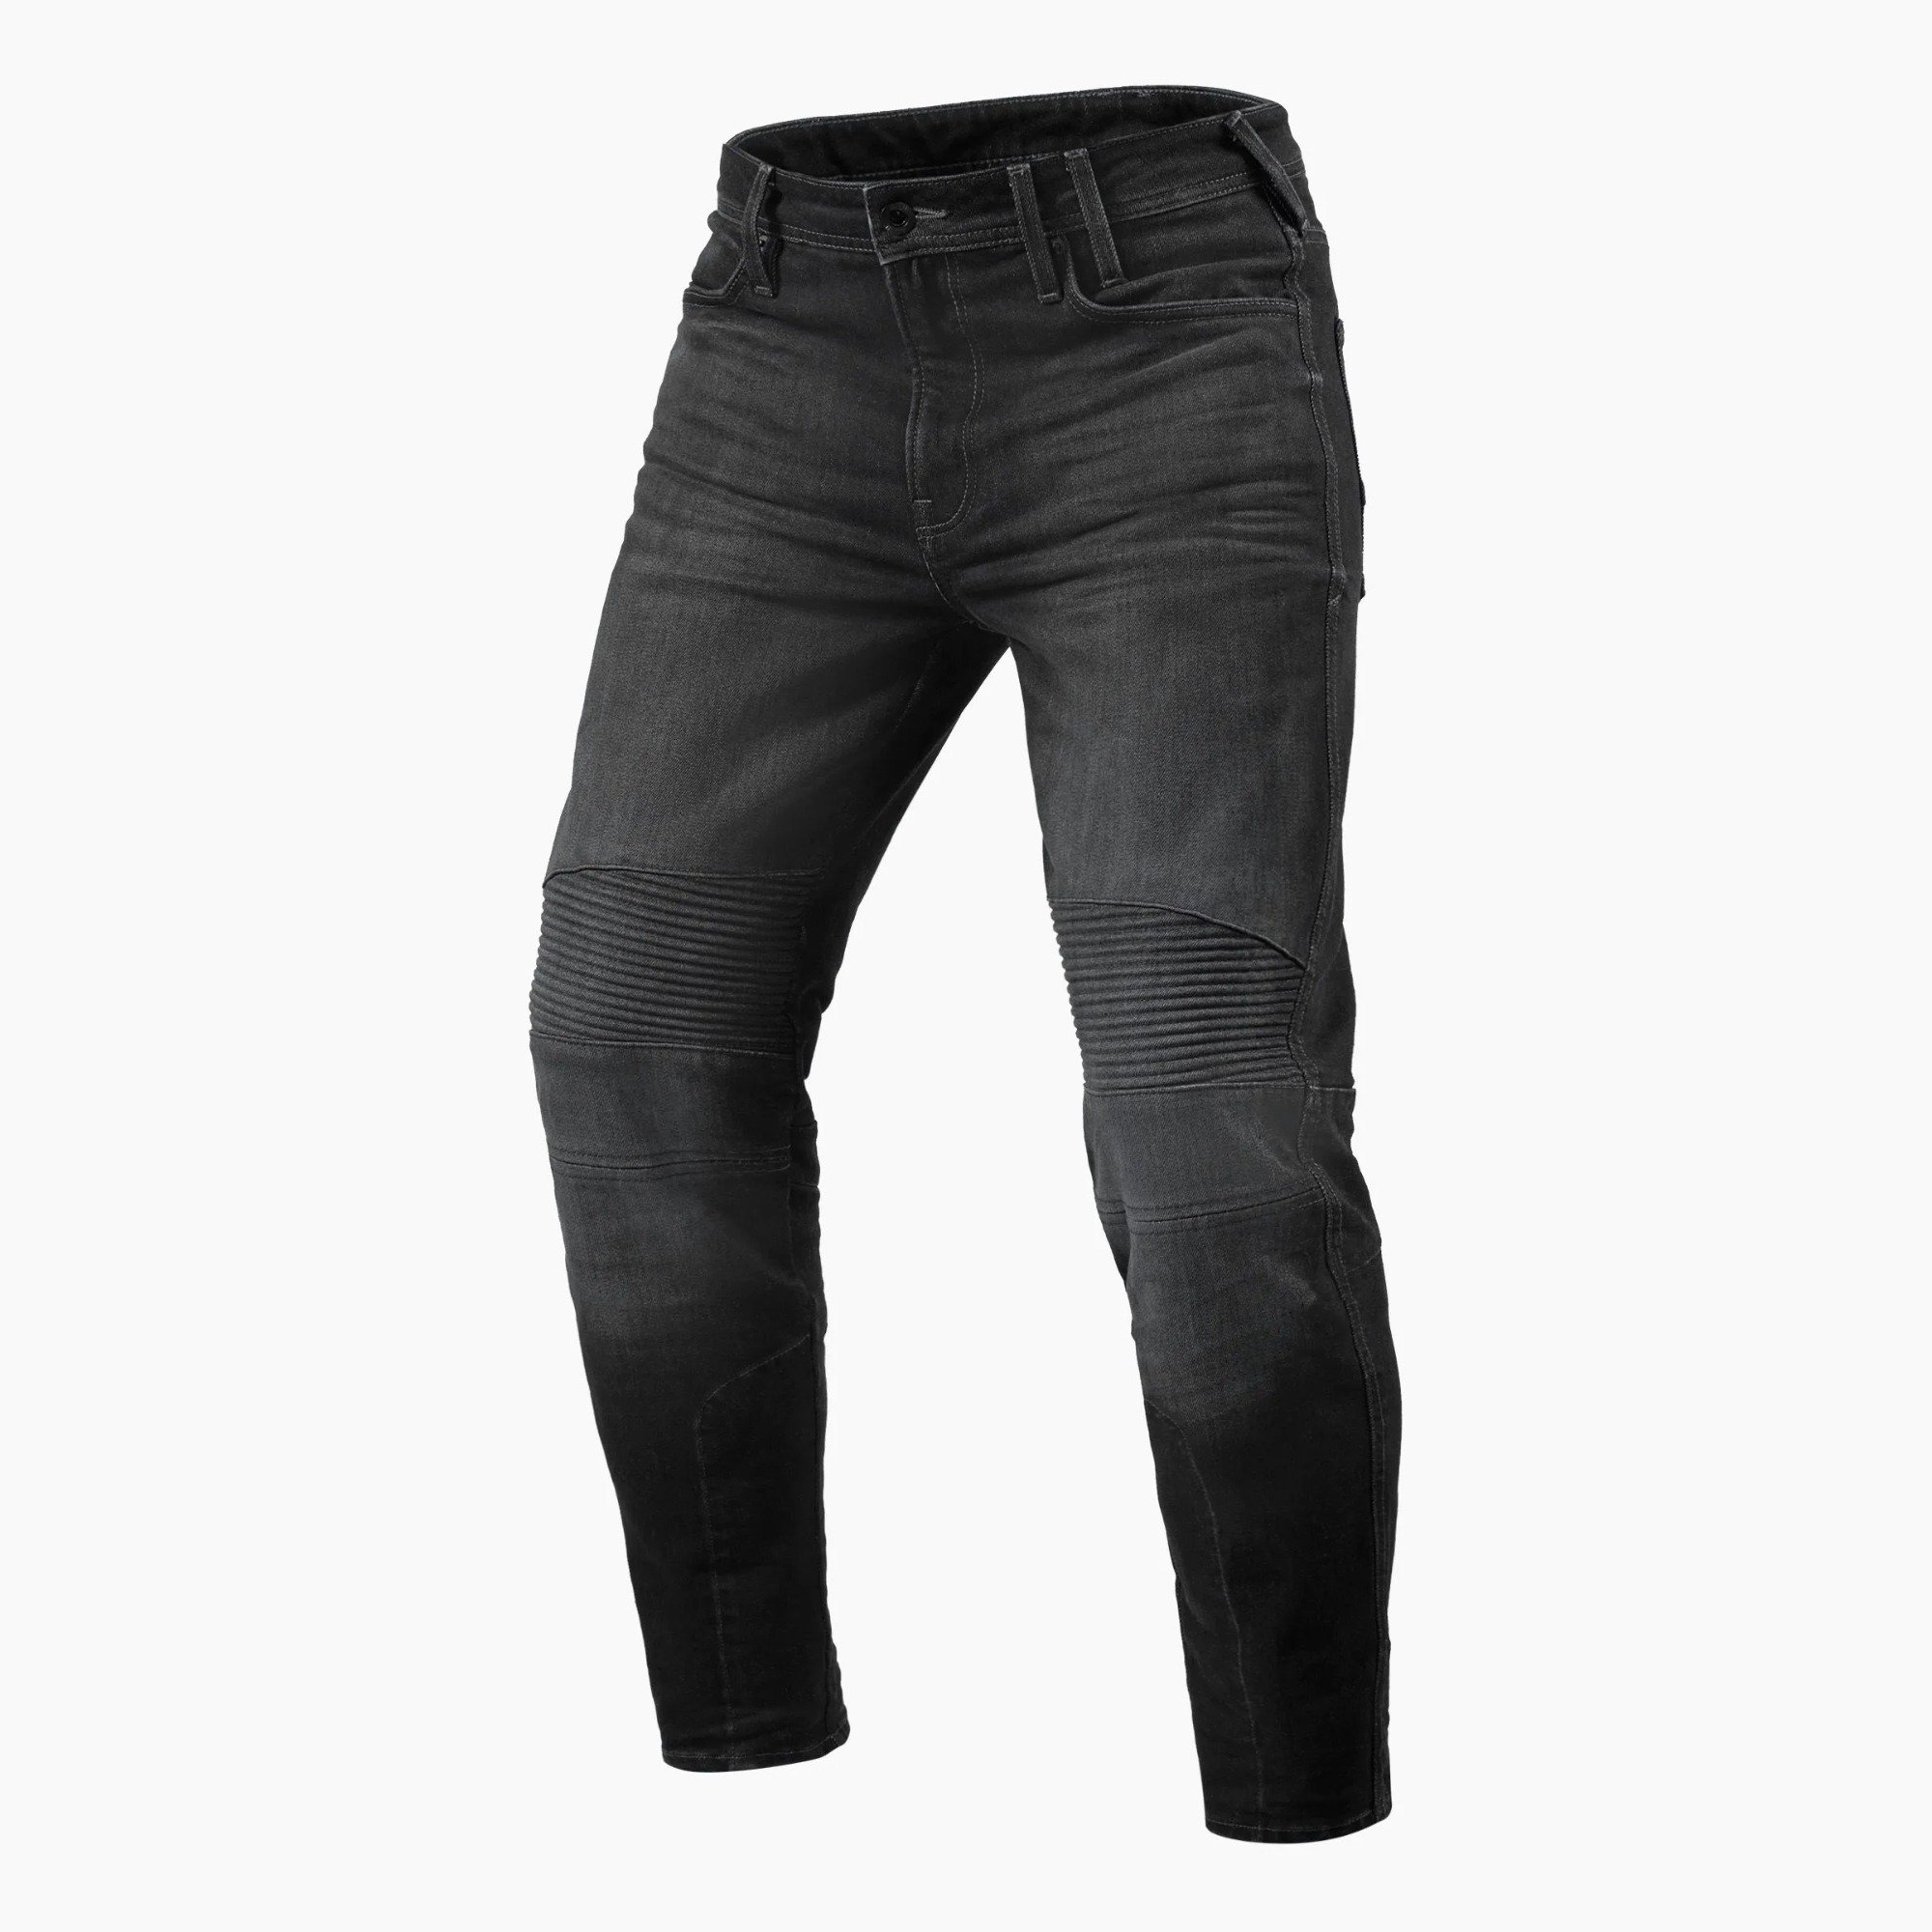 Image of REV'IT! Jeans Moto 2 TF Dark Grey Used Motorcycle Jeans Size L34/W31 ID 8700001337793